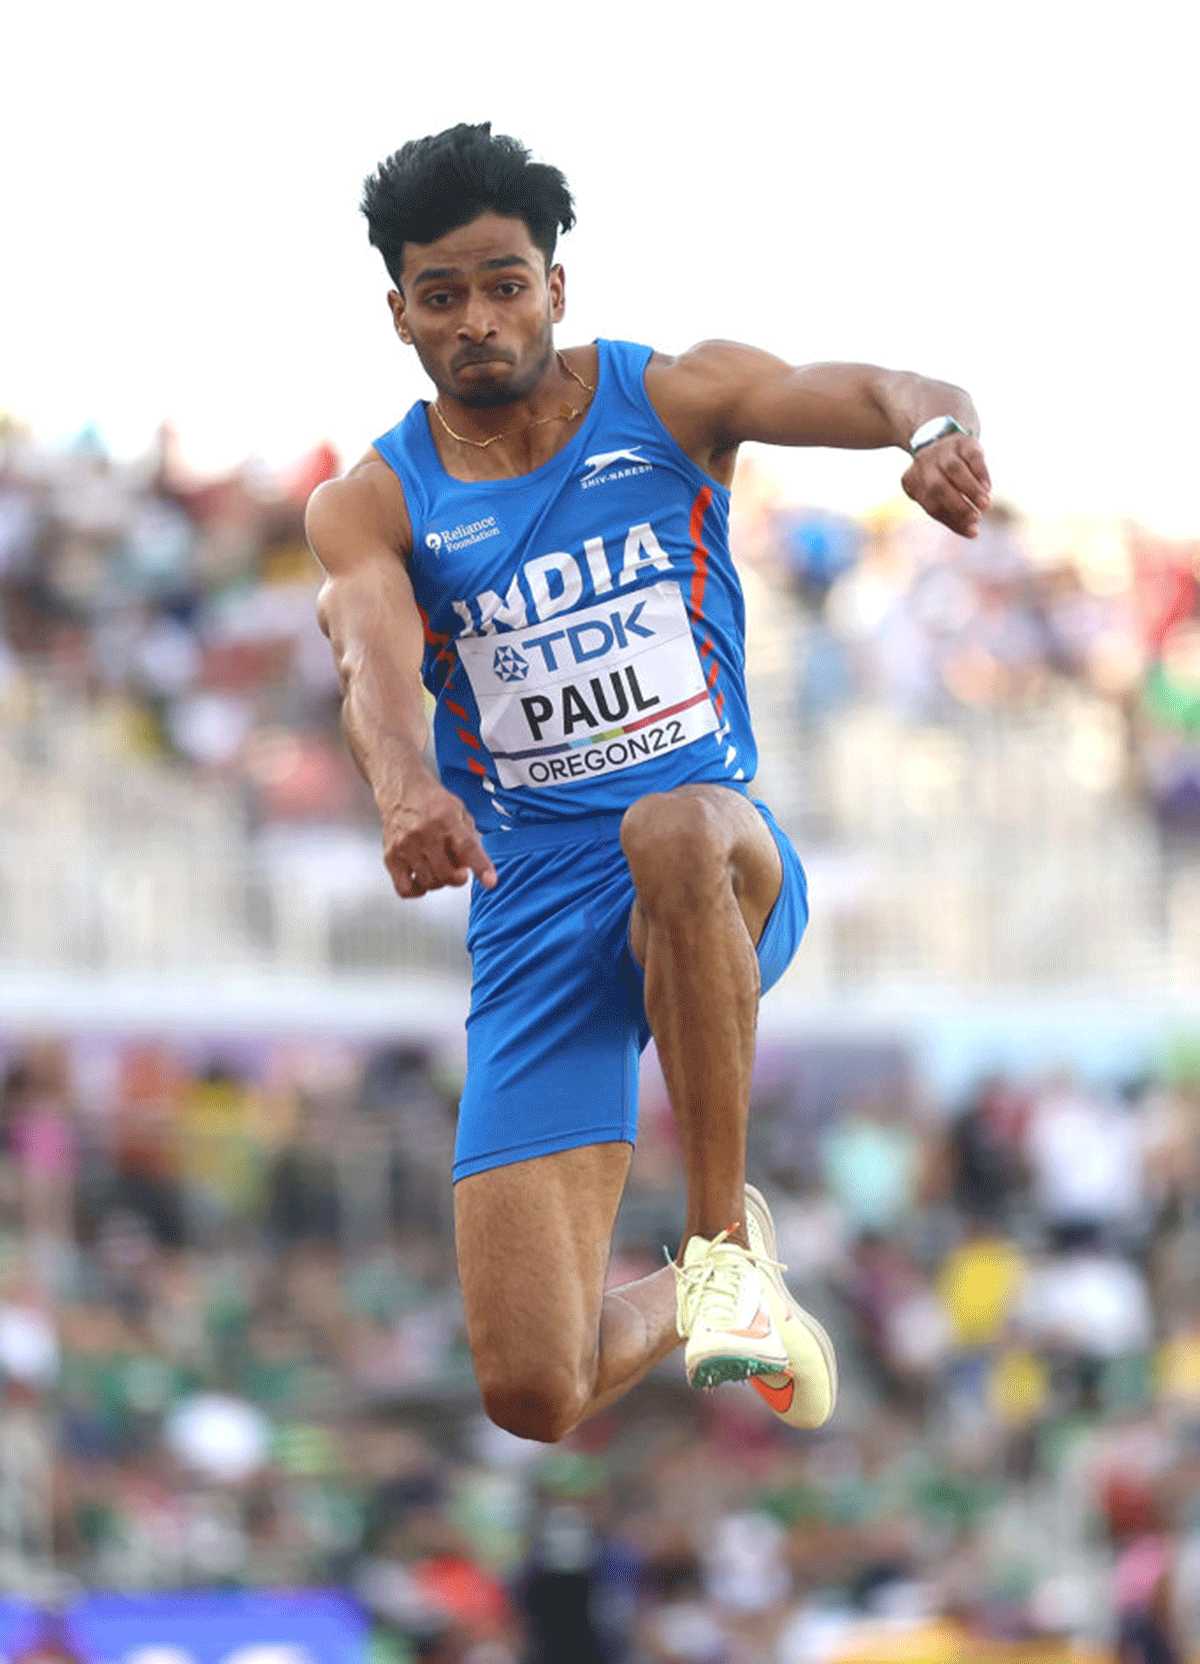 India's Eldhose Paul competes in the Men's Triple Jump qualification at the World Athletics Championships Oregon22 at Hayward Field in Eugene, Oregon, on Thursday 